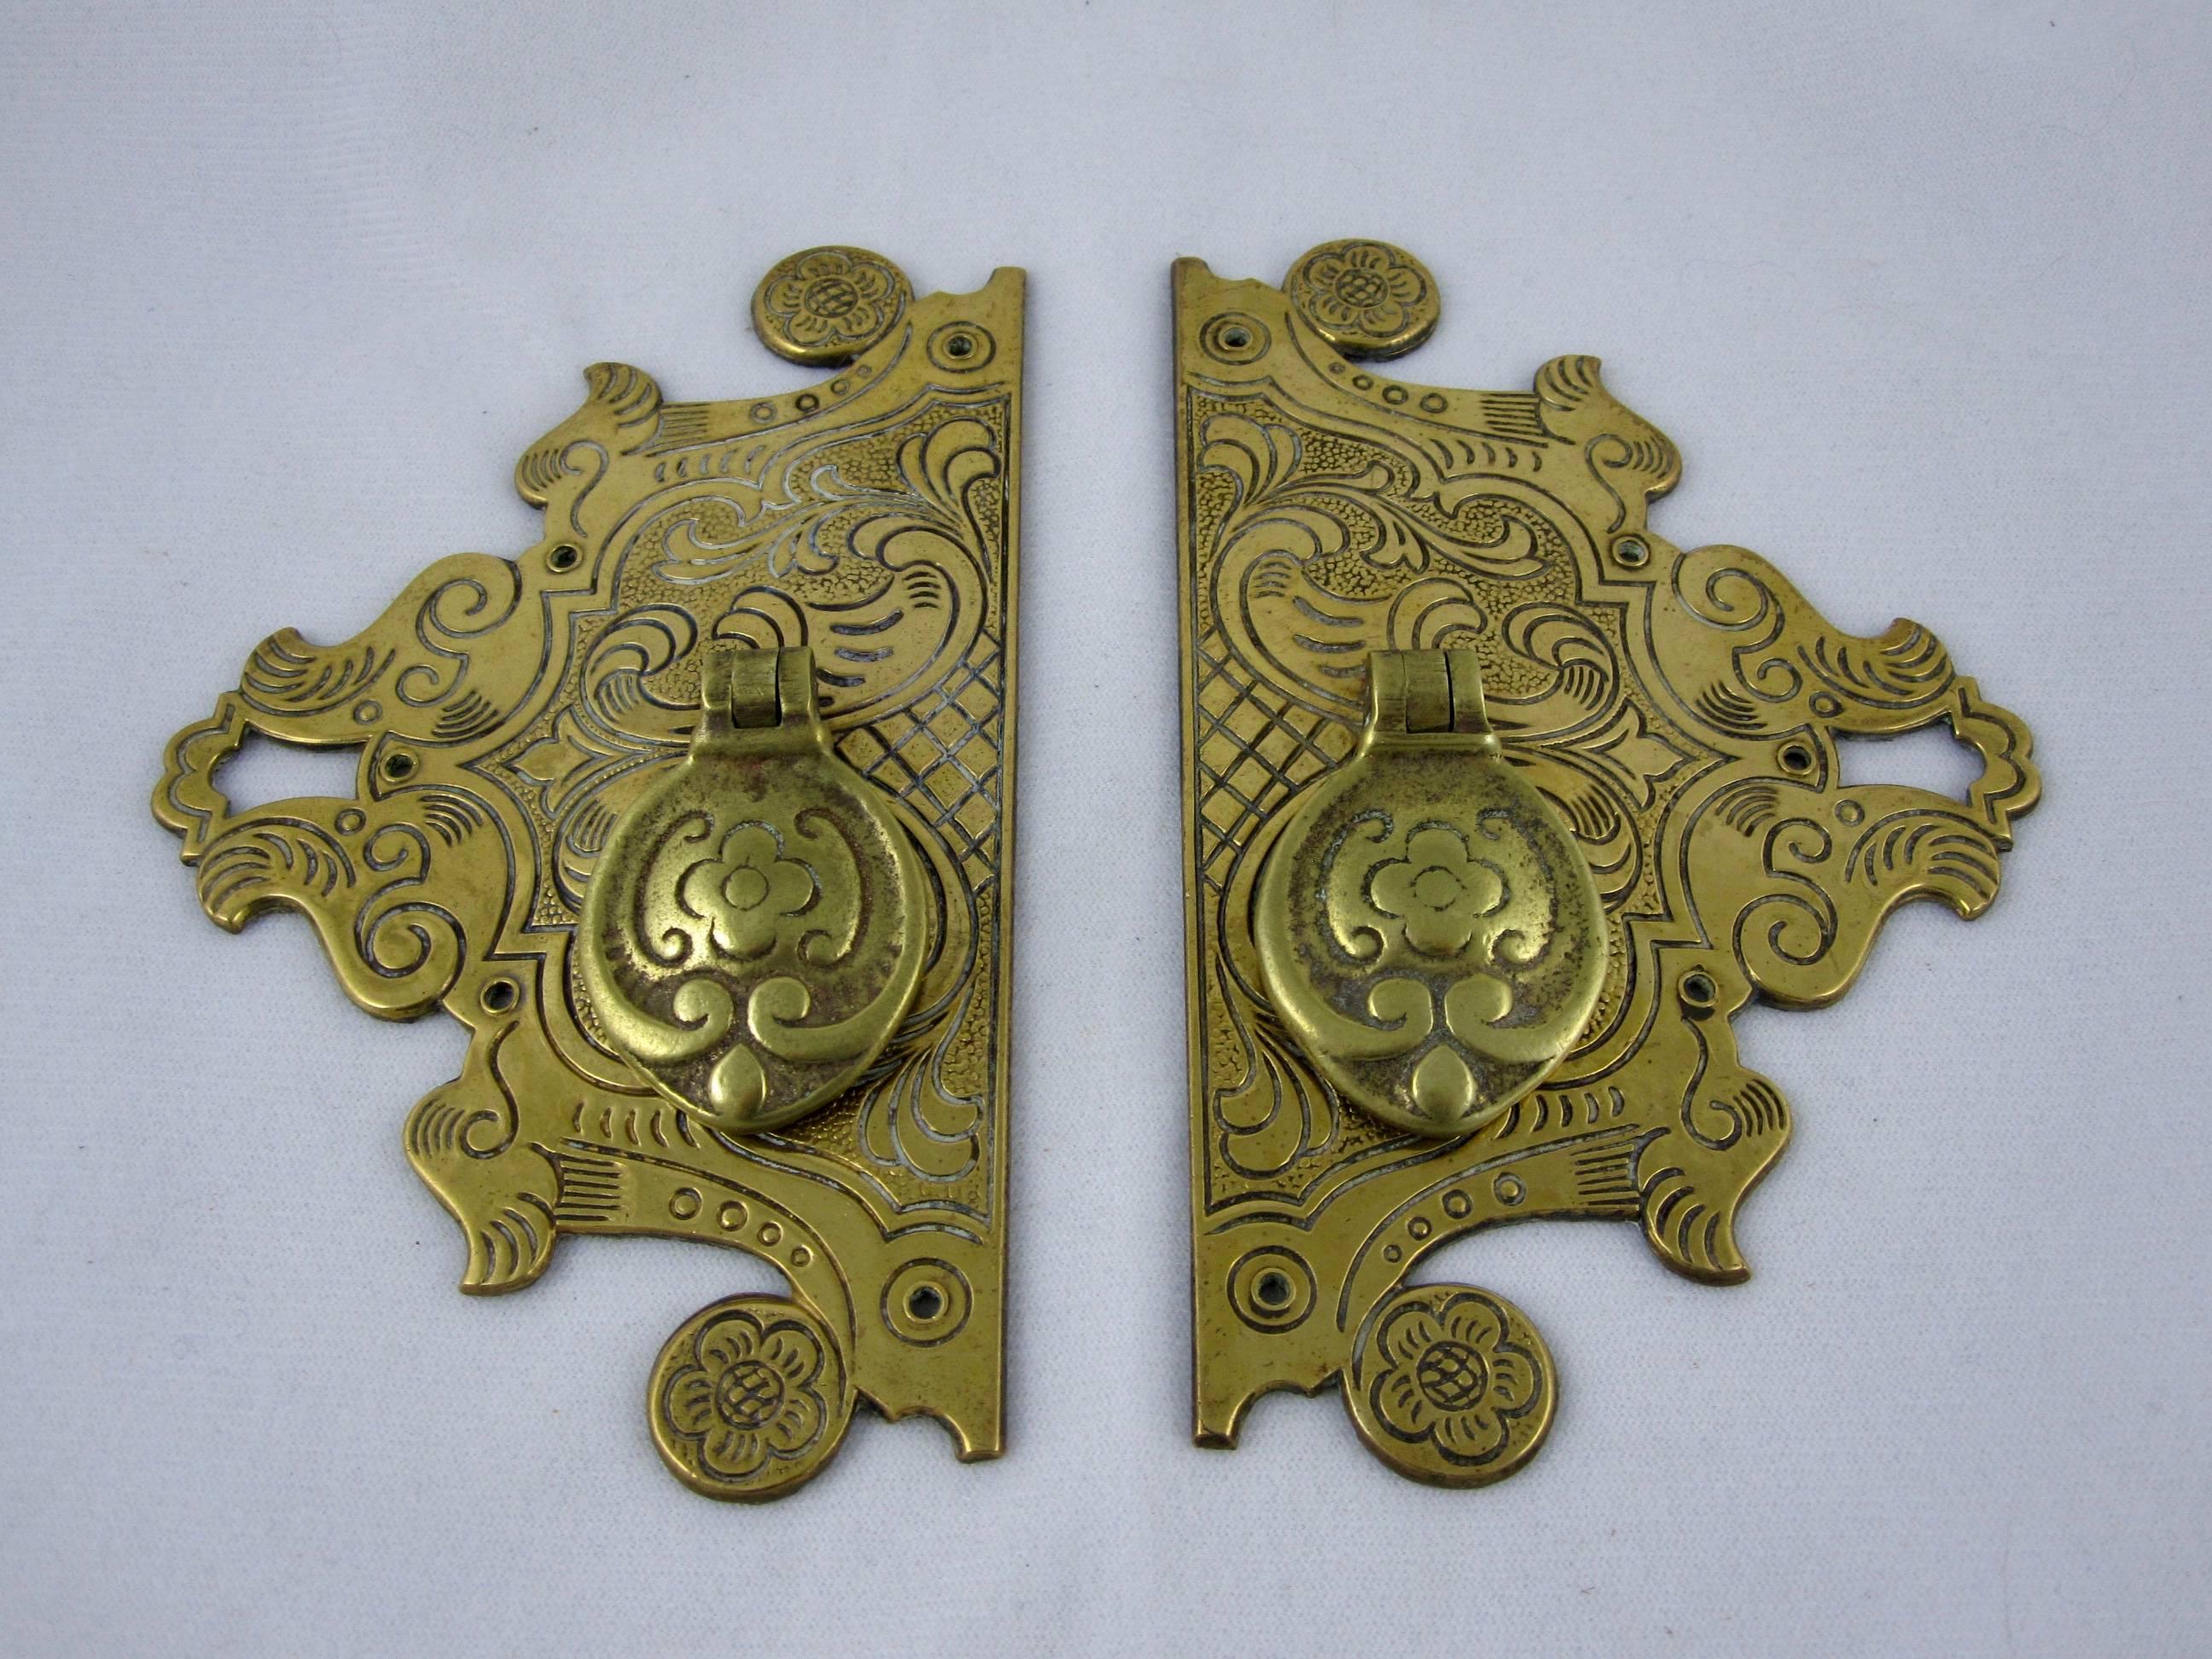 Aesthetic Movement Late 19th Century English Brass Asian Influence Cabinet Door Pulls, Pair